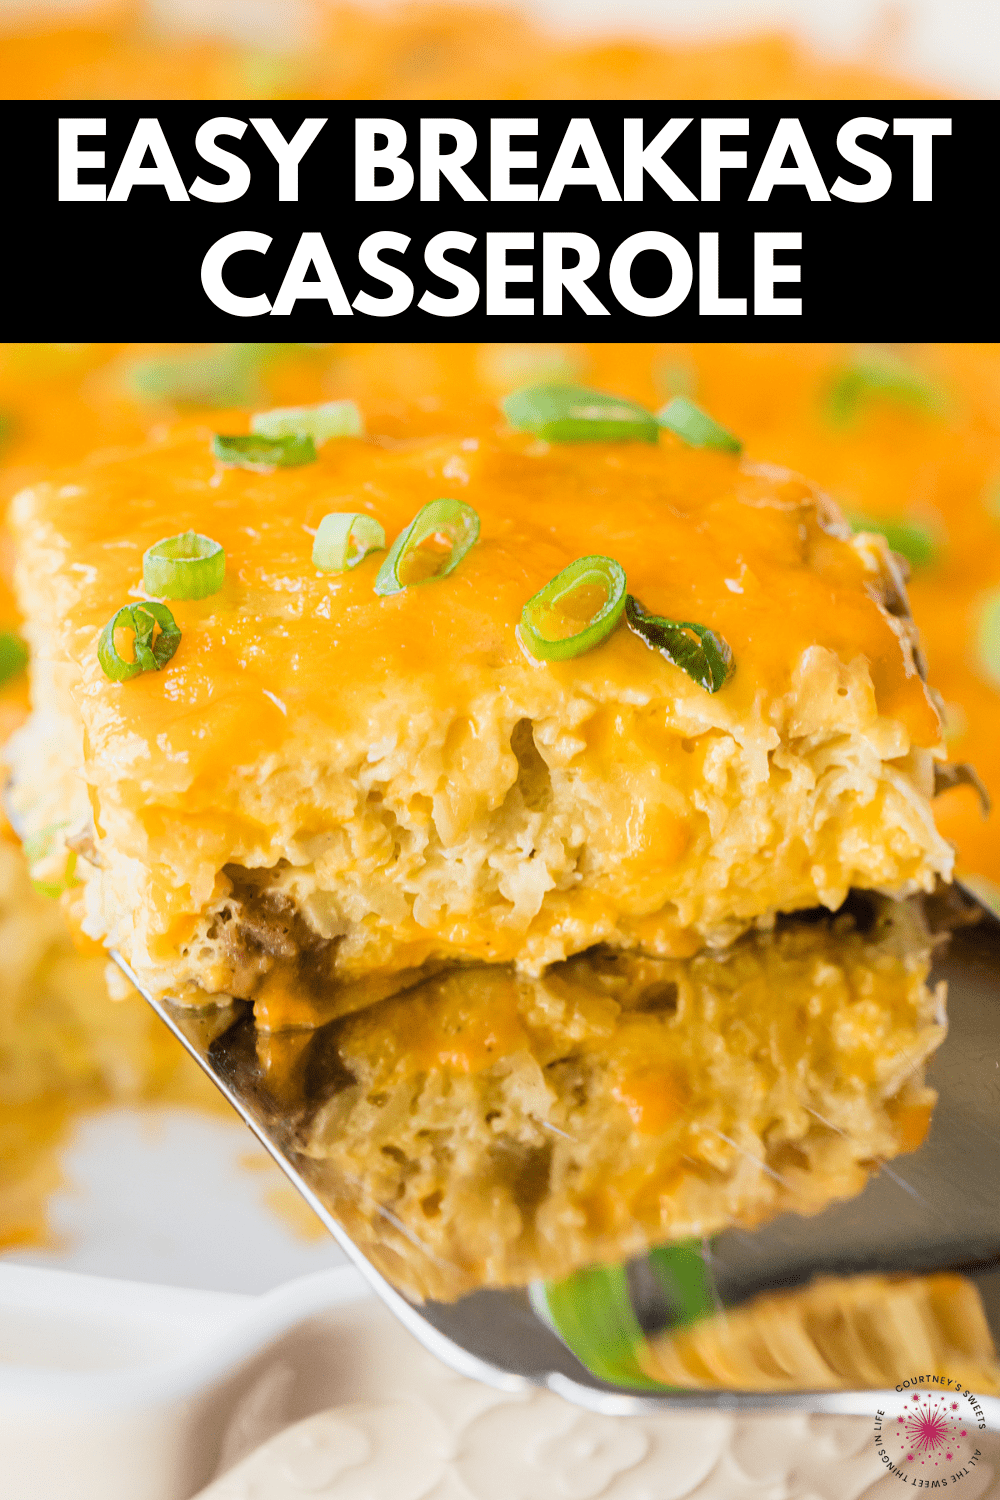 easy breakfast casserole images with text on it for pinterest.